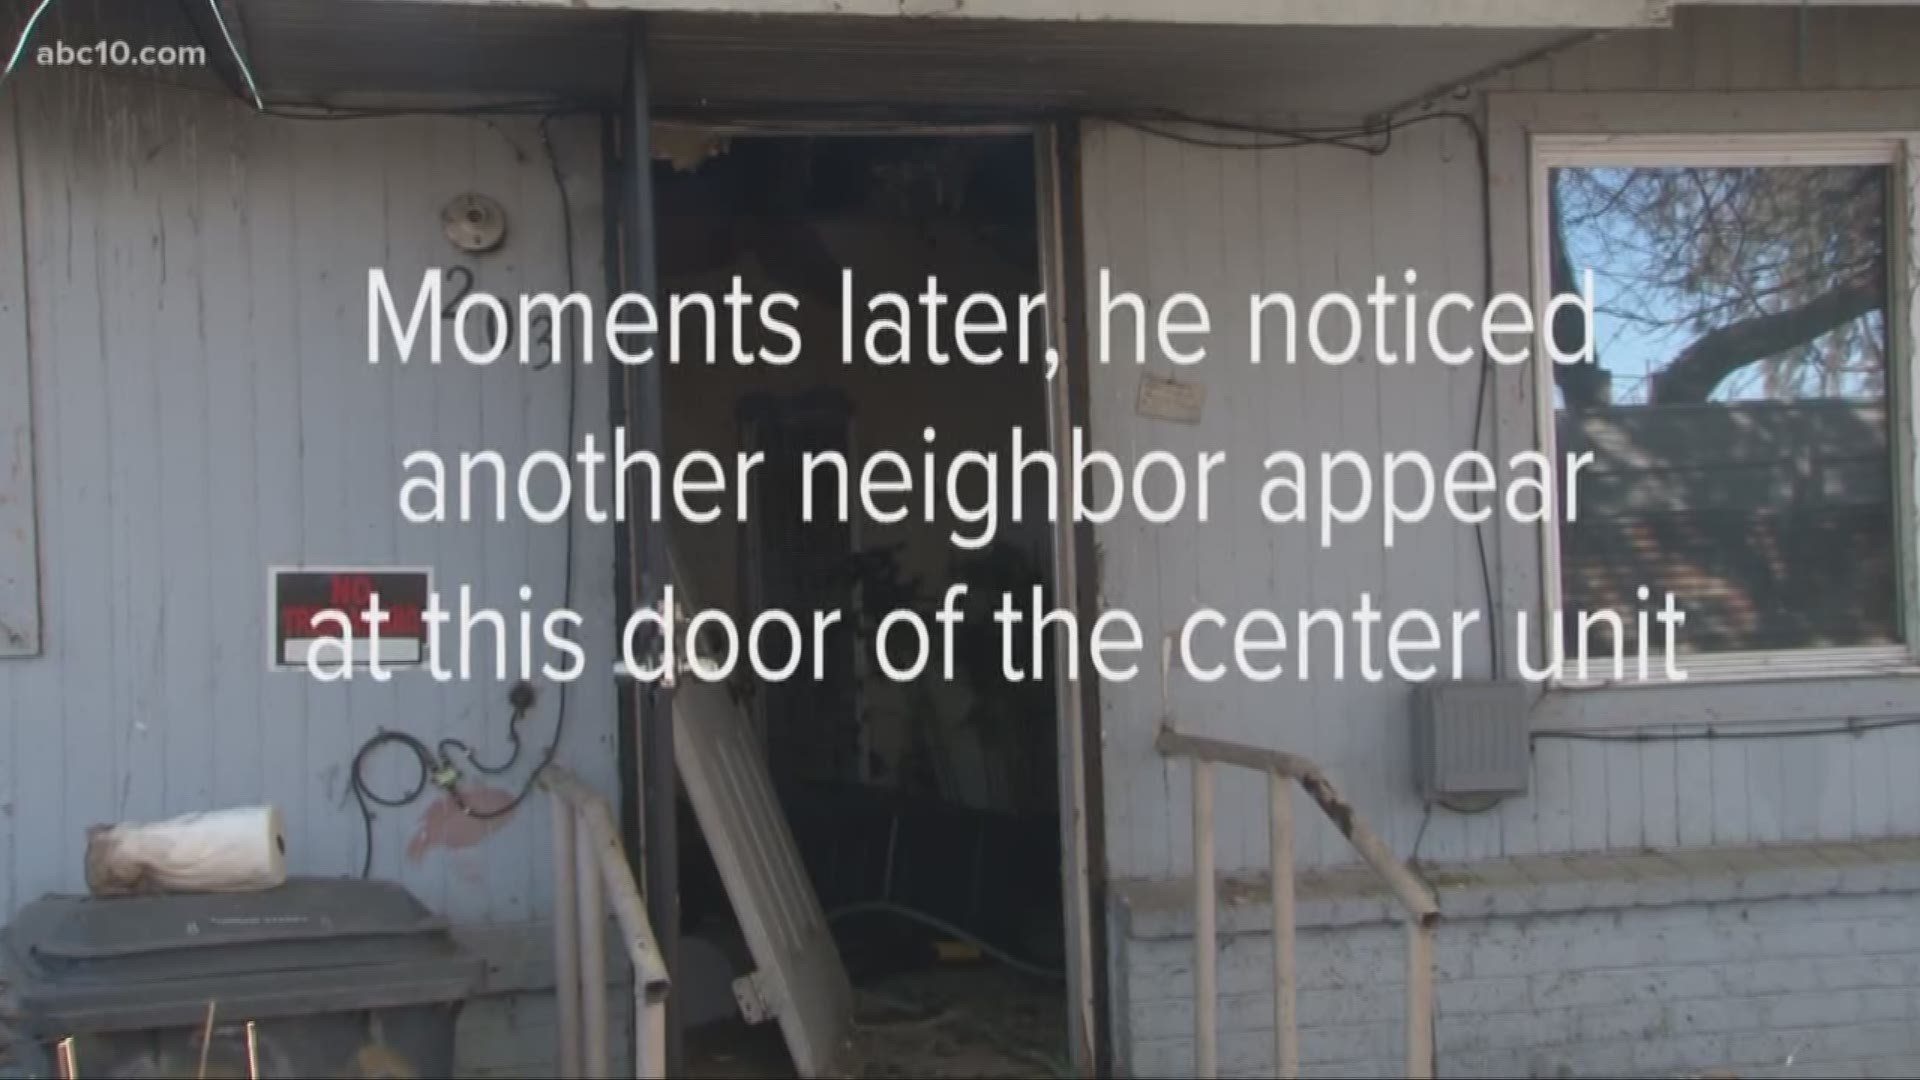 Eyewitnesses detail a reluctant hero's act of selflessness in saving an elderly woman from an apartment fire.